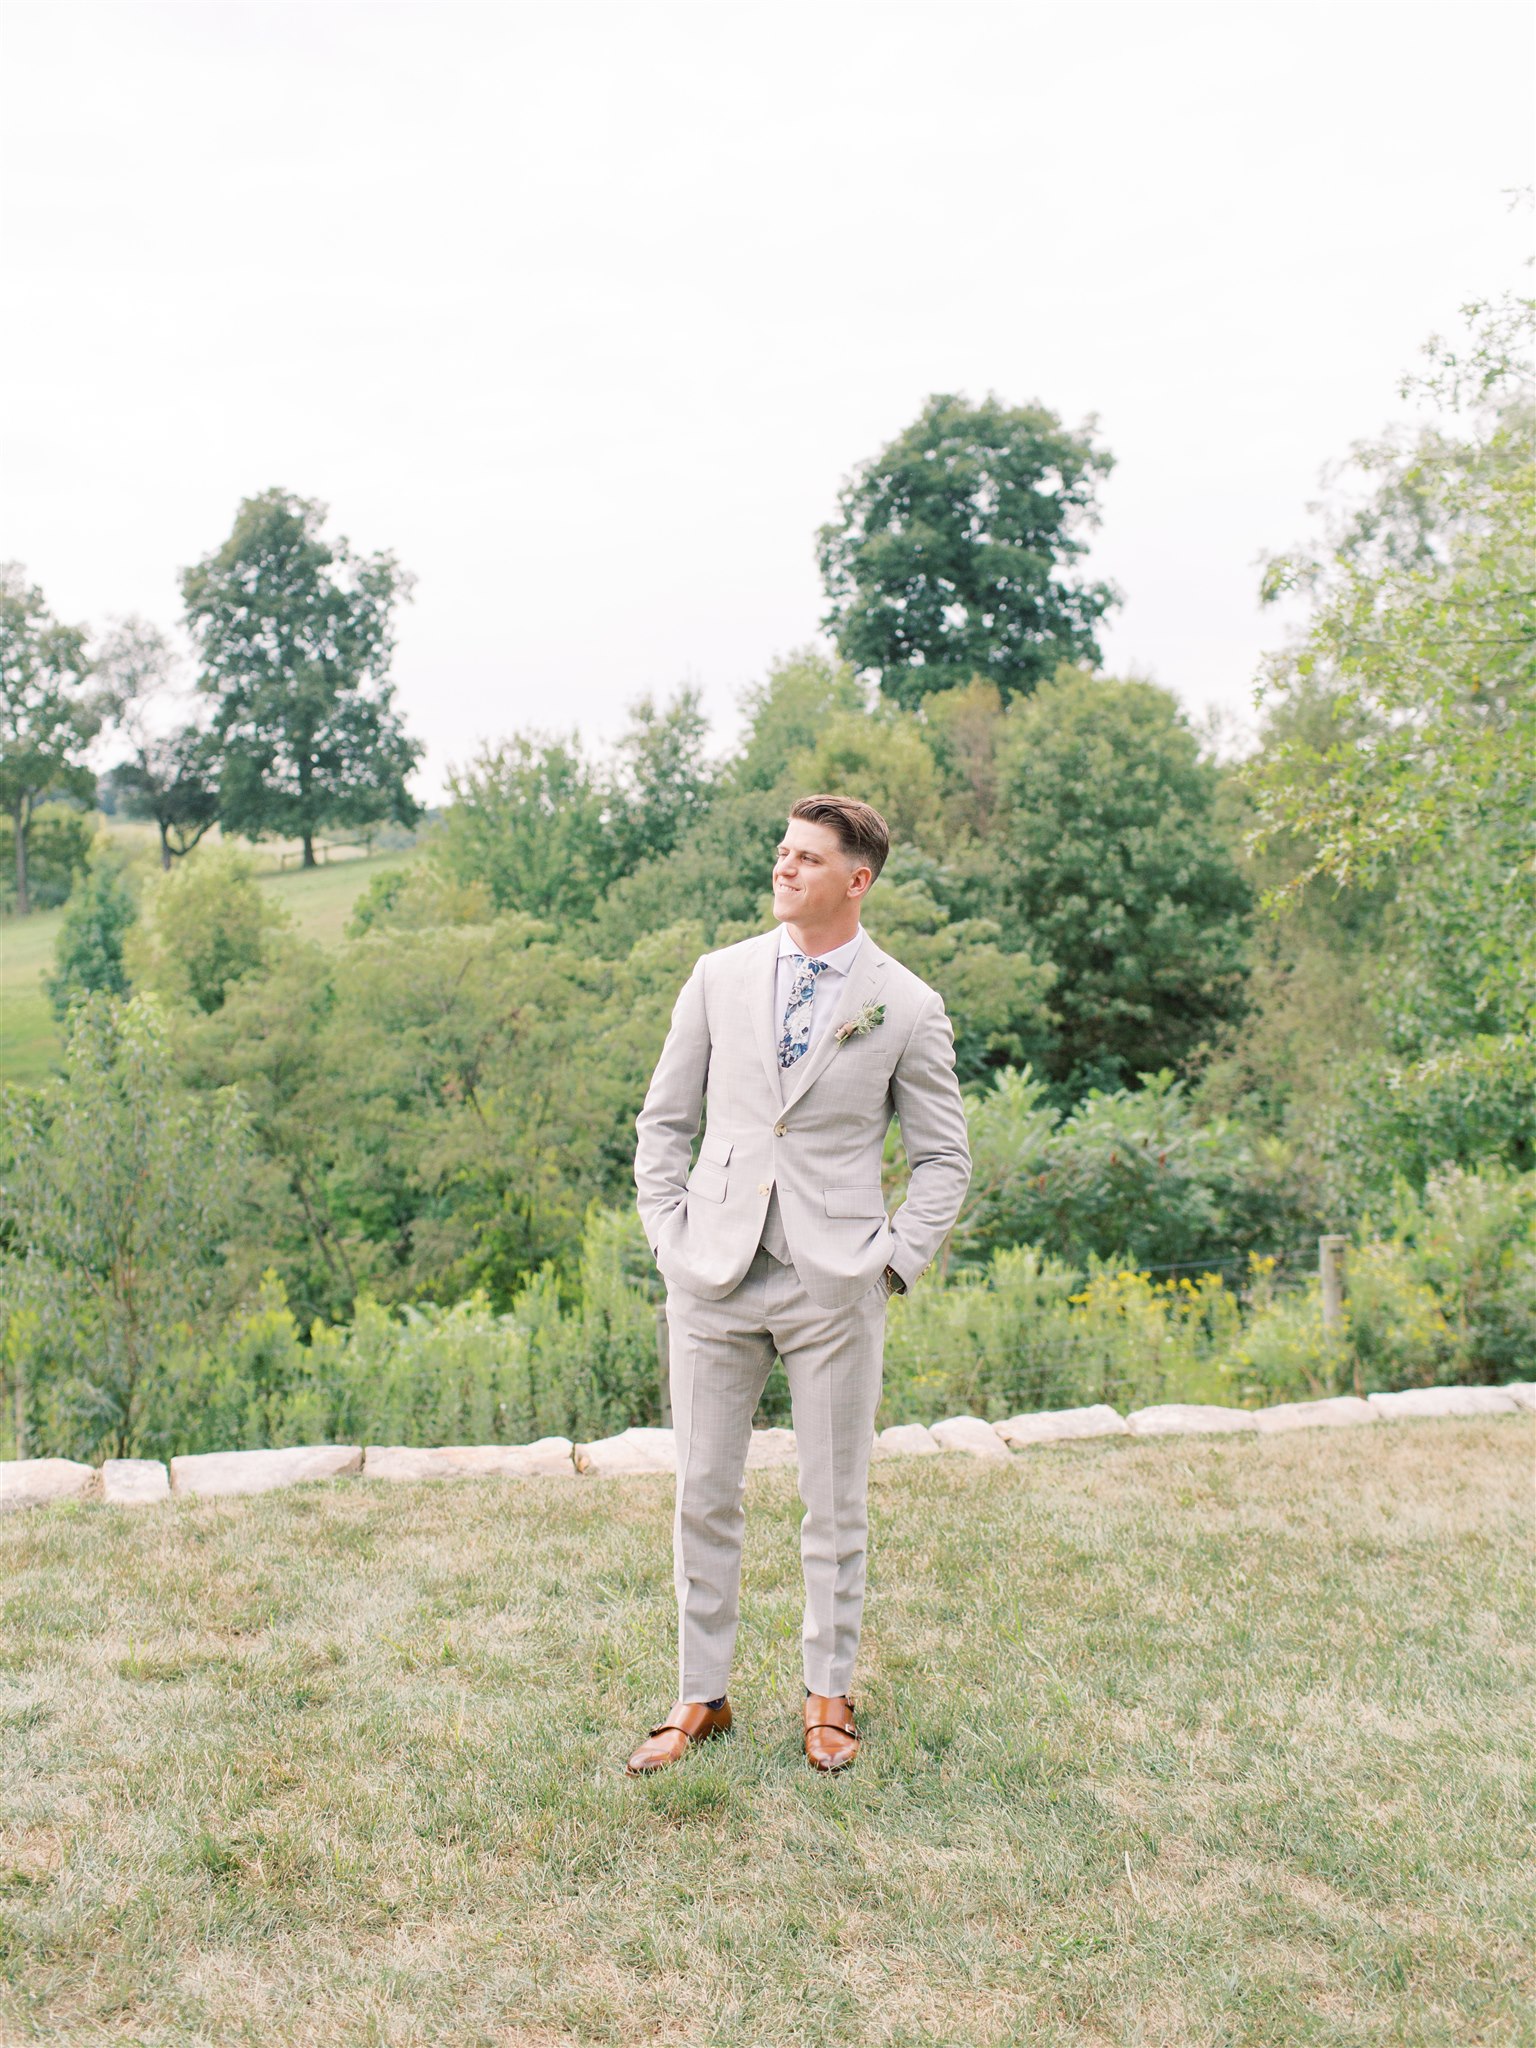 Modern, Rustic and Mauve Wedding: Devin and Shawn